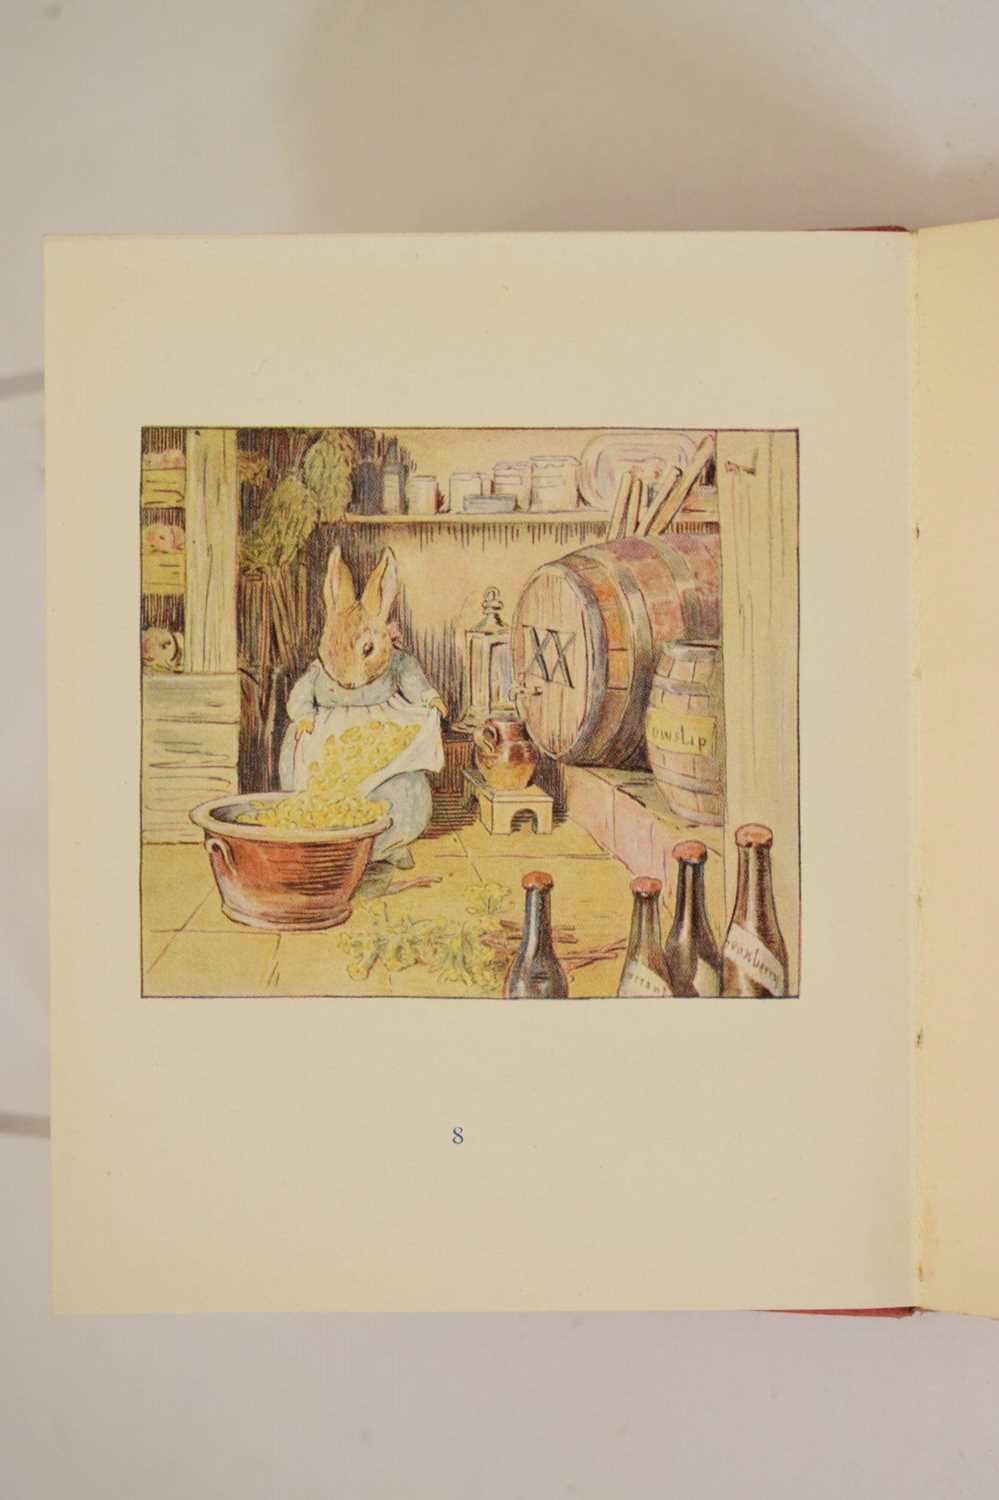 Potter, Beatrix - 'Cecily Parsley's Nursery Rhymes' - First edition - Image 21 of 23